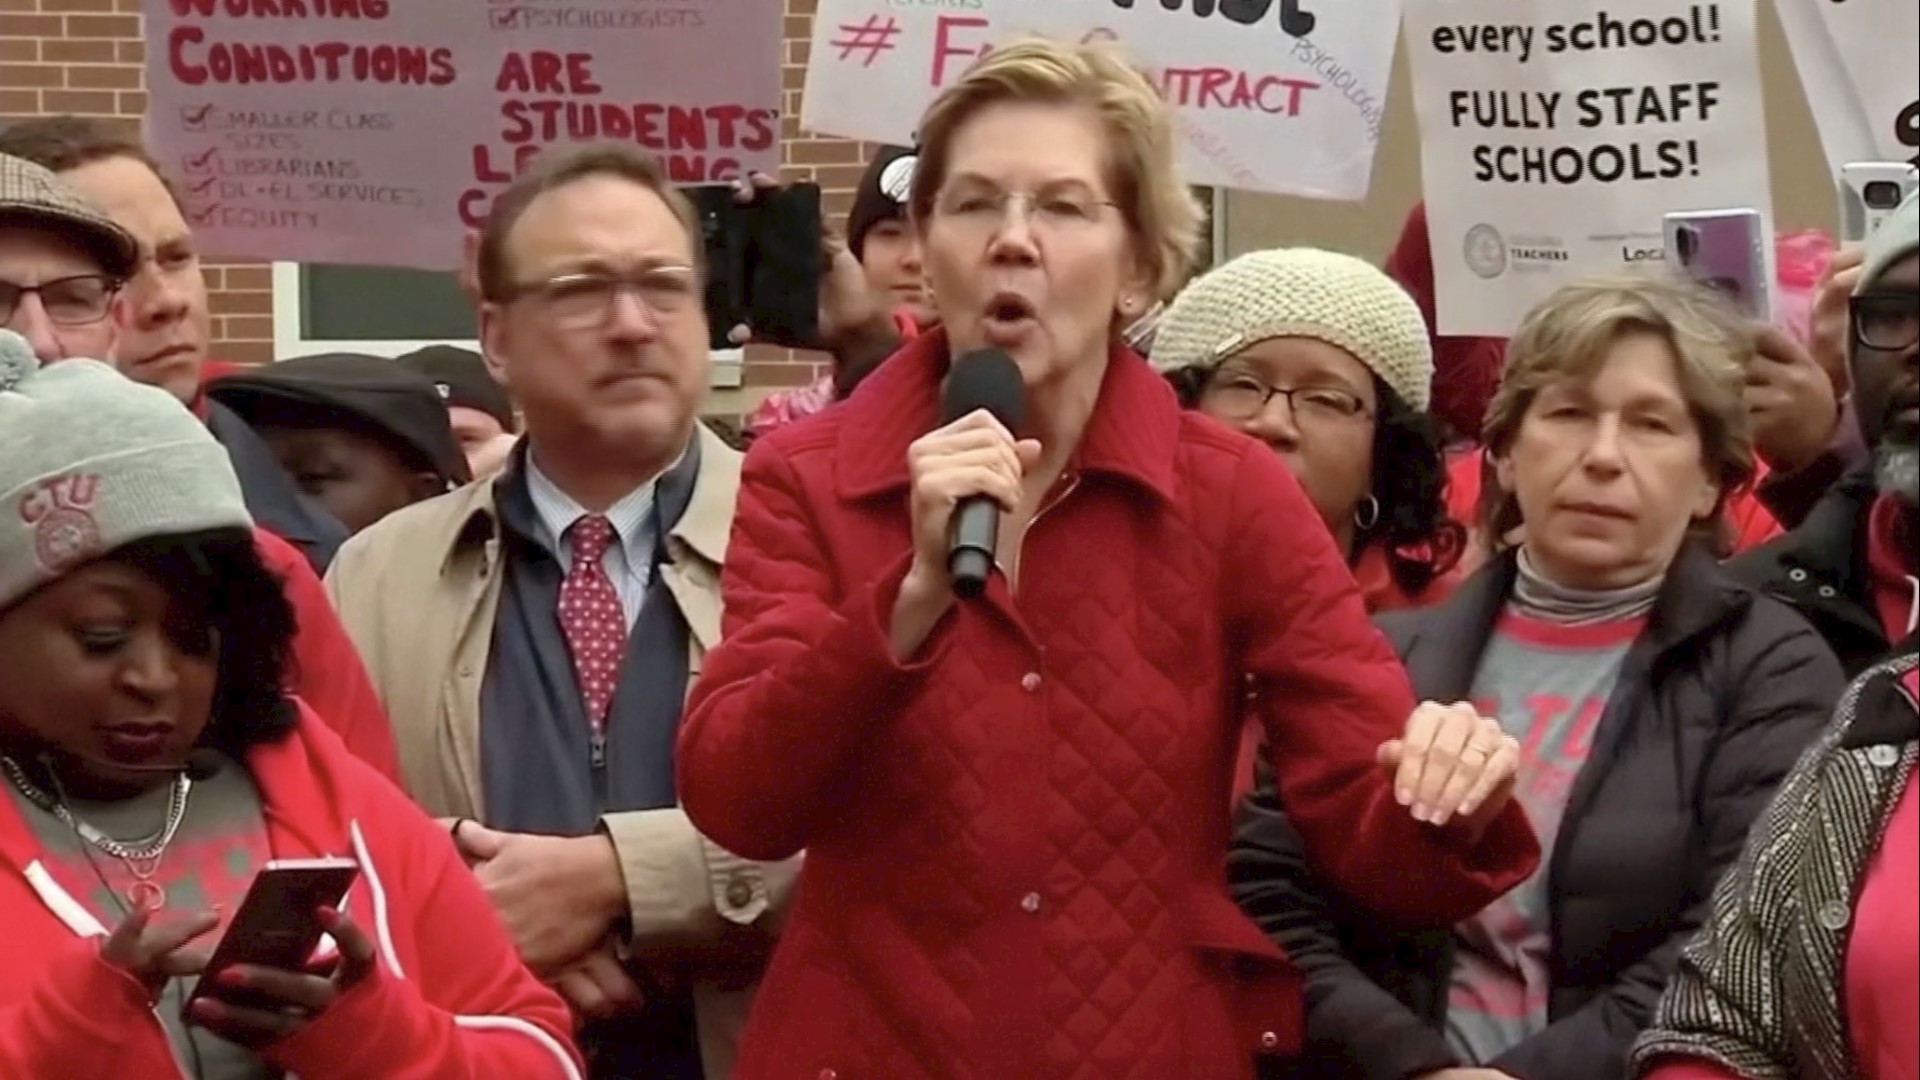 Elizabeth Warren thinks the NCAA allowing for student athletes to receive some compensation is a good start, but the 2020 candidate thinks unions should be the next step. Veuer's Justin Kircher has the story.